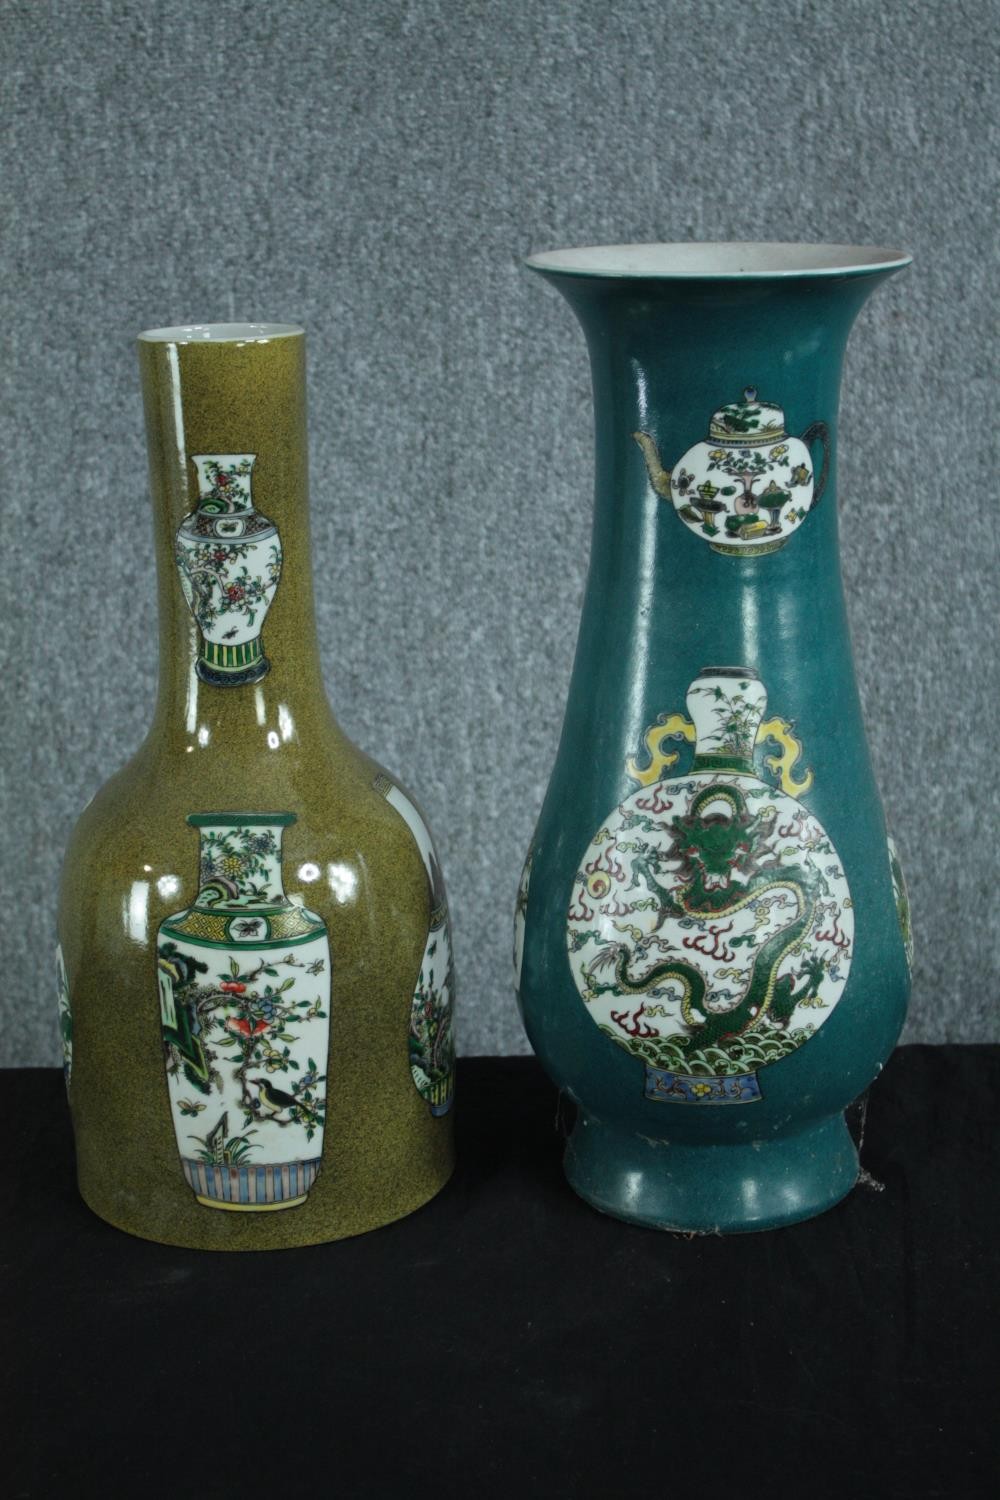 Two Chinese vases. Signed on the base with the artist's seal and decorated with Chinese porcelain